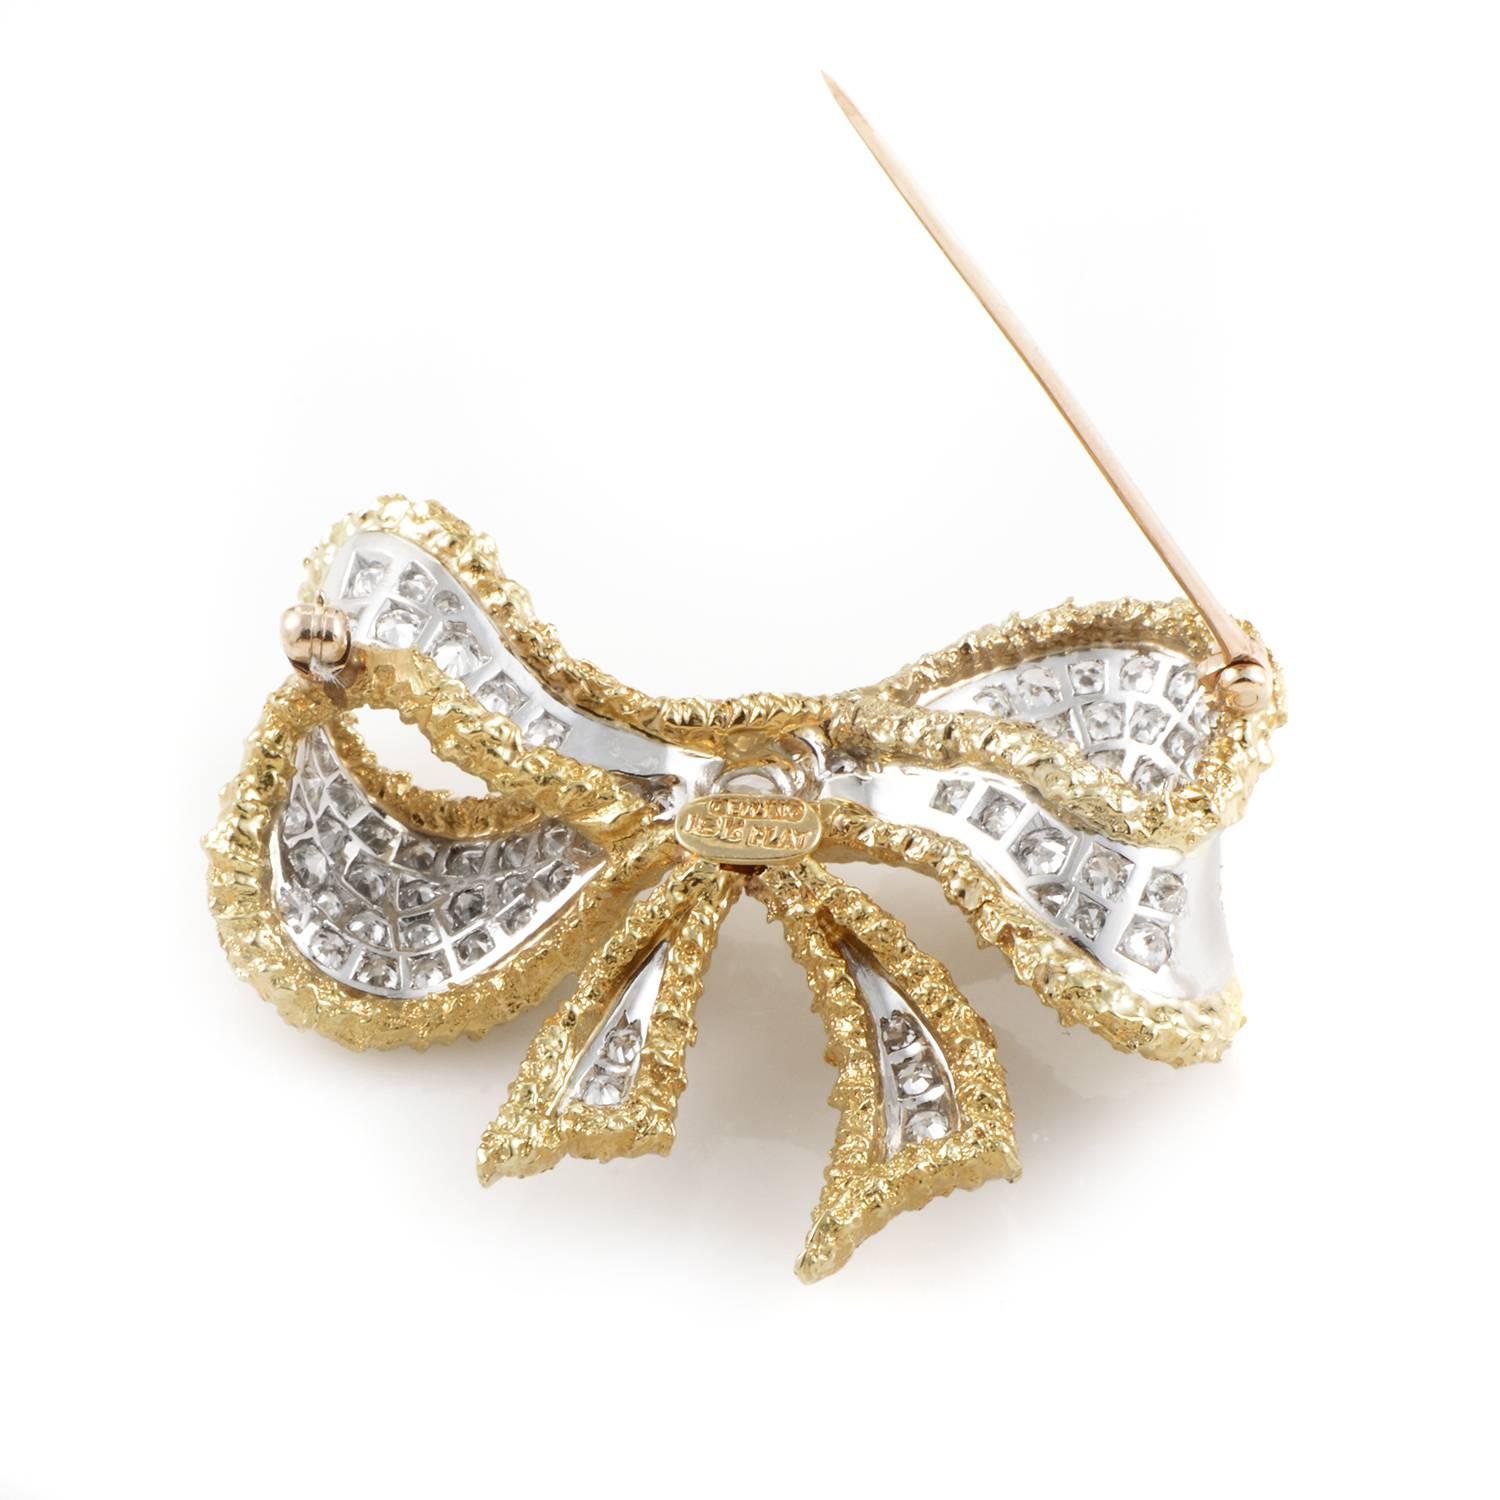 This adorable vintage bow from Cellino has a classic appearance that will never go out of style. The bow is made of a combination of 18K yellow gold and platinum set with a plush pave of white diamonds.
Diamond Carat Weight: 5.00